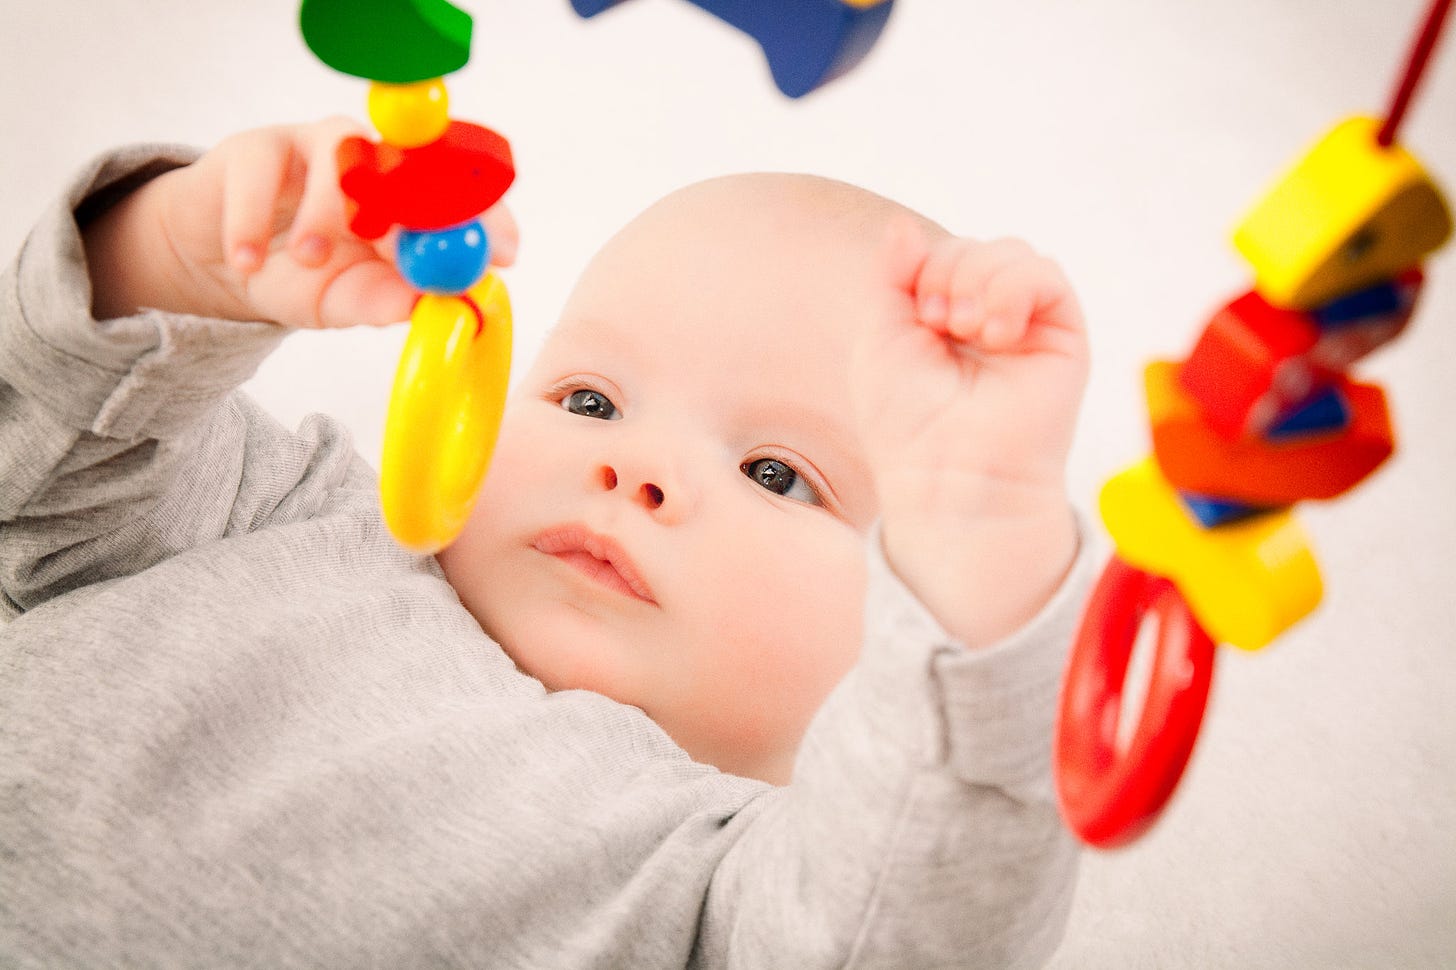 A baby laying on their back on a white blanket and reaching up to touch hanging pieces of a mobile with intense focus.